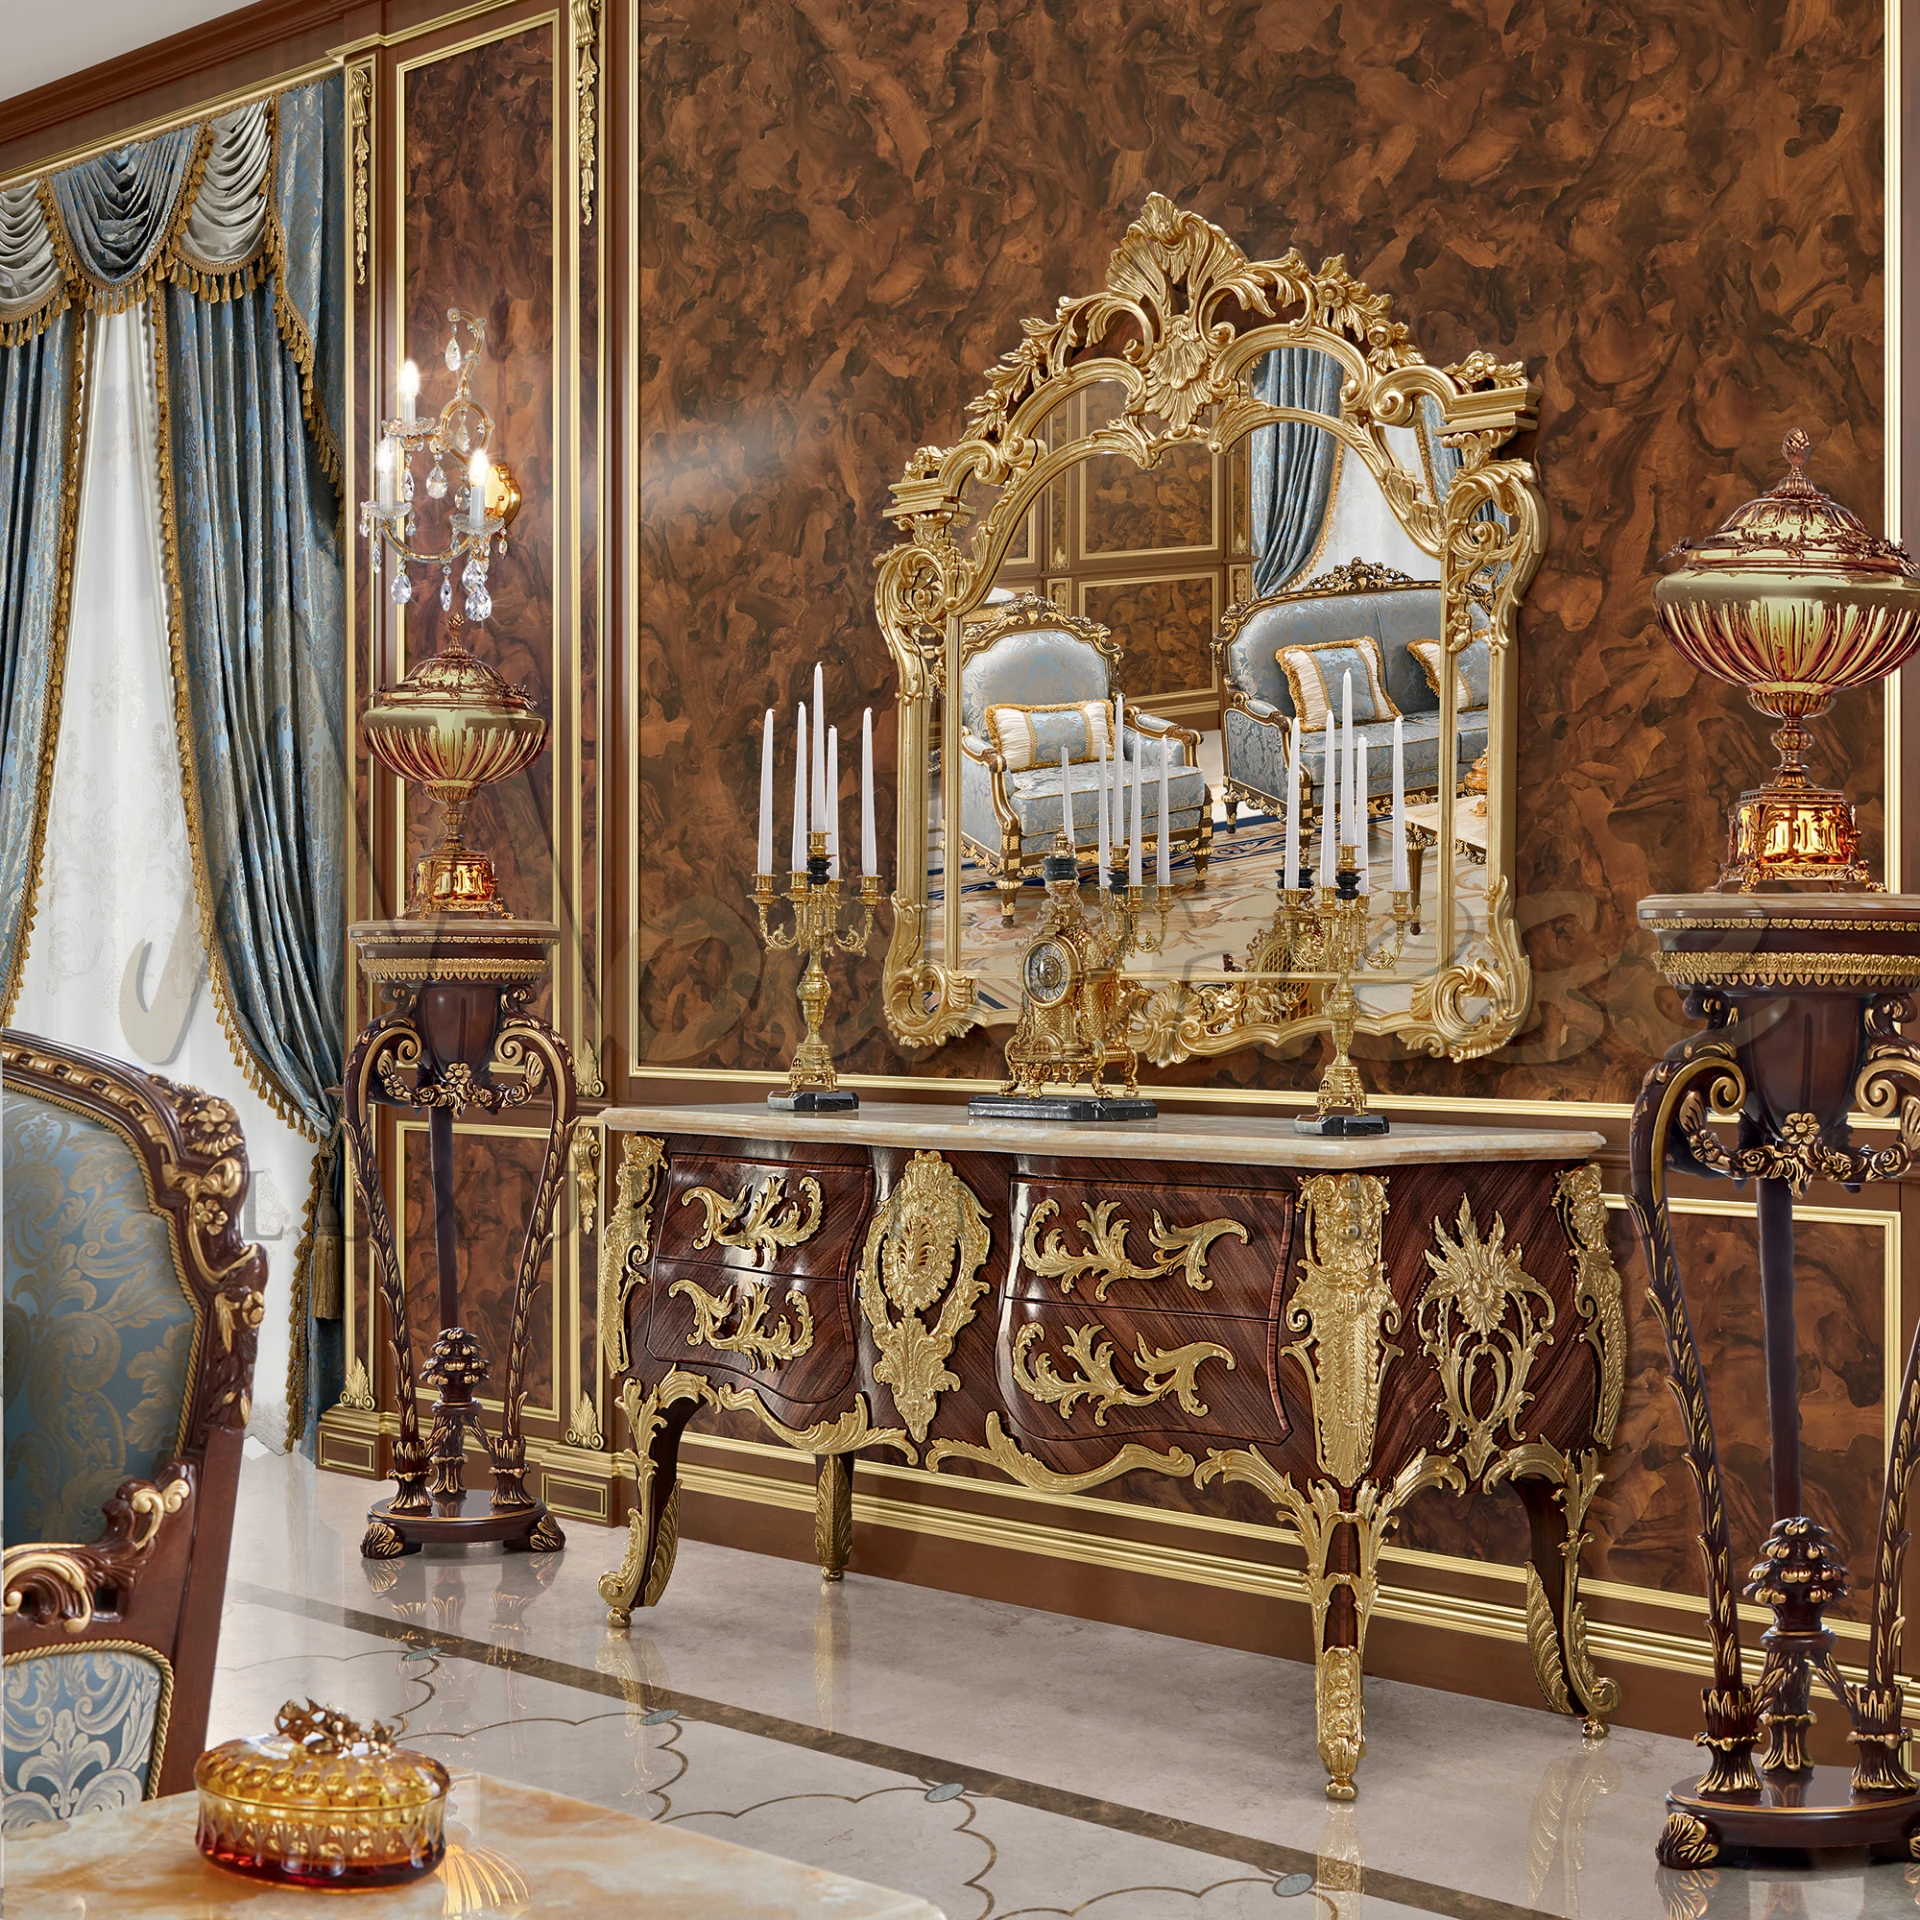 A Fancy room in the Italian Baroque style table furnished with complex golden designs and stylish decor.